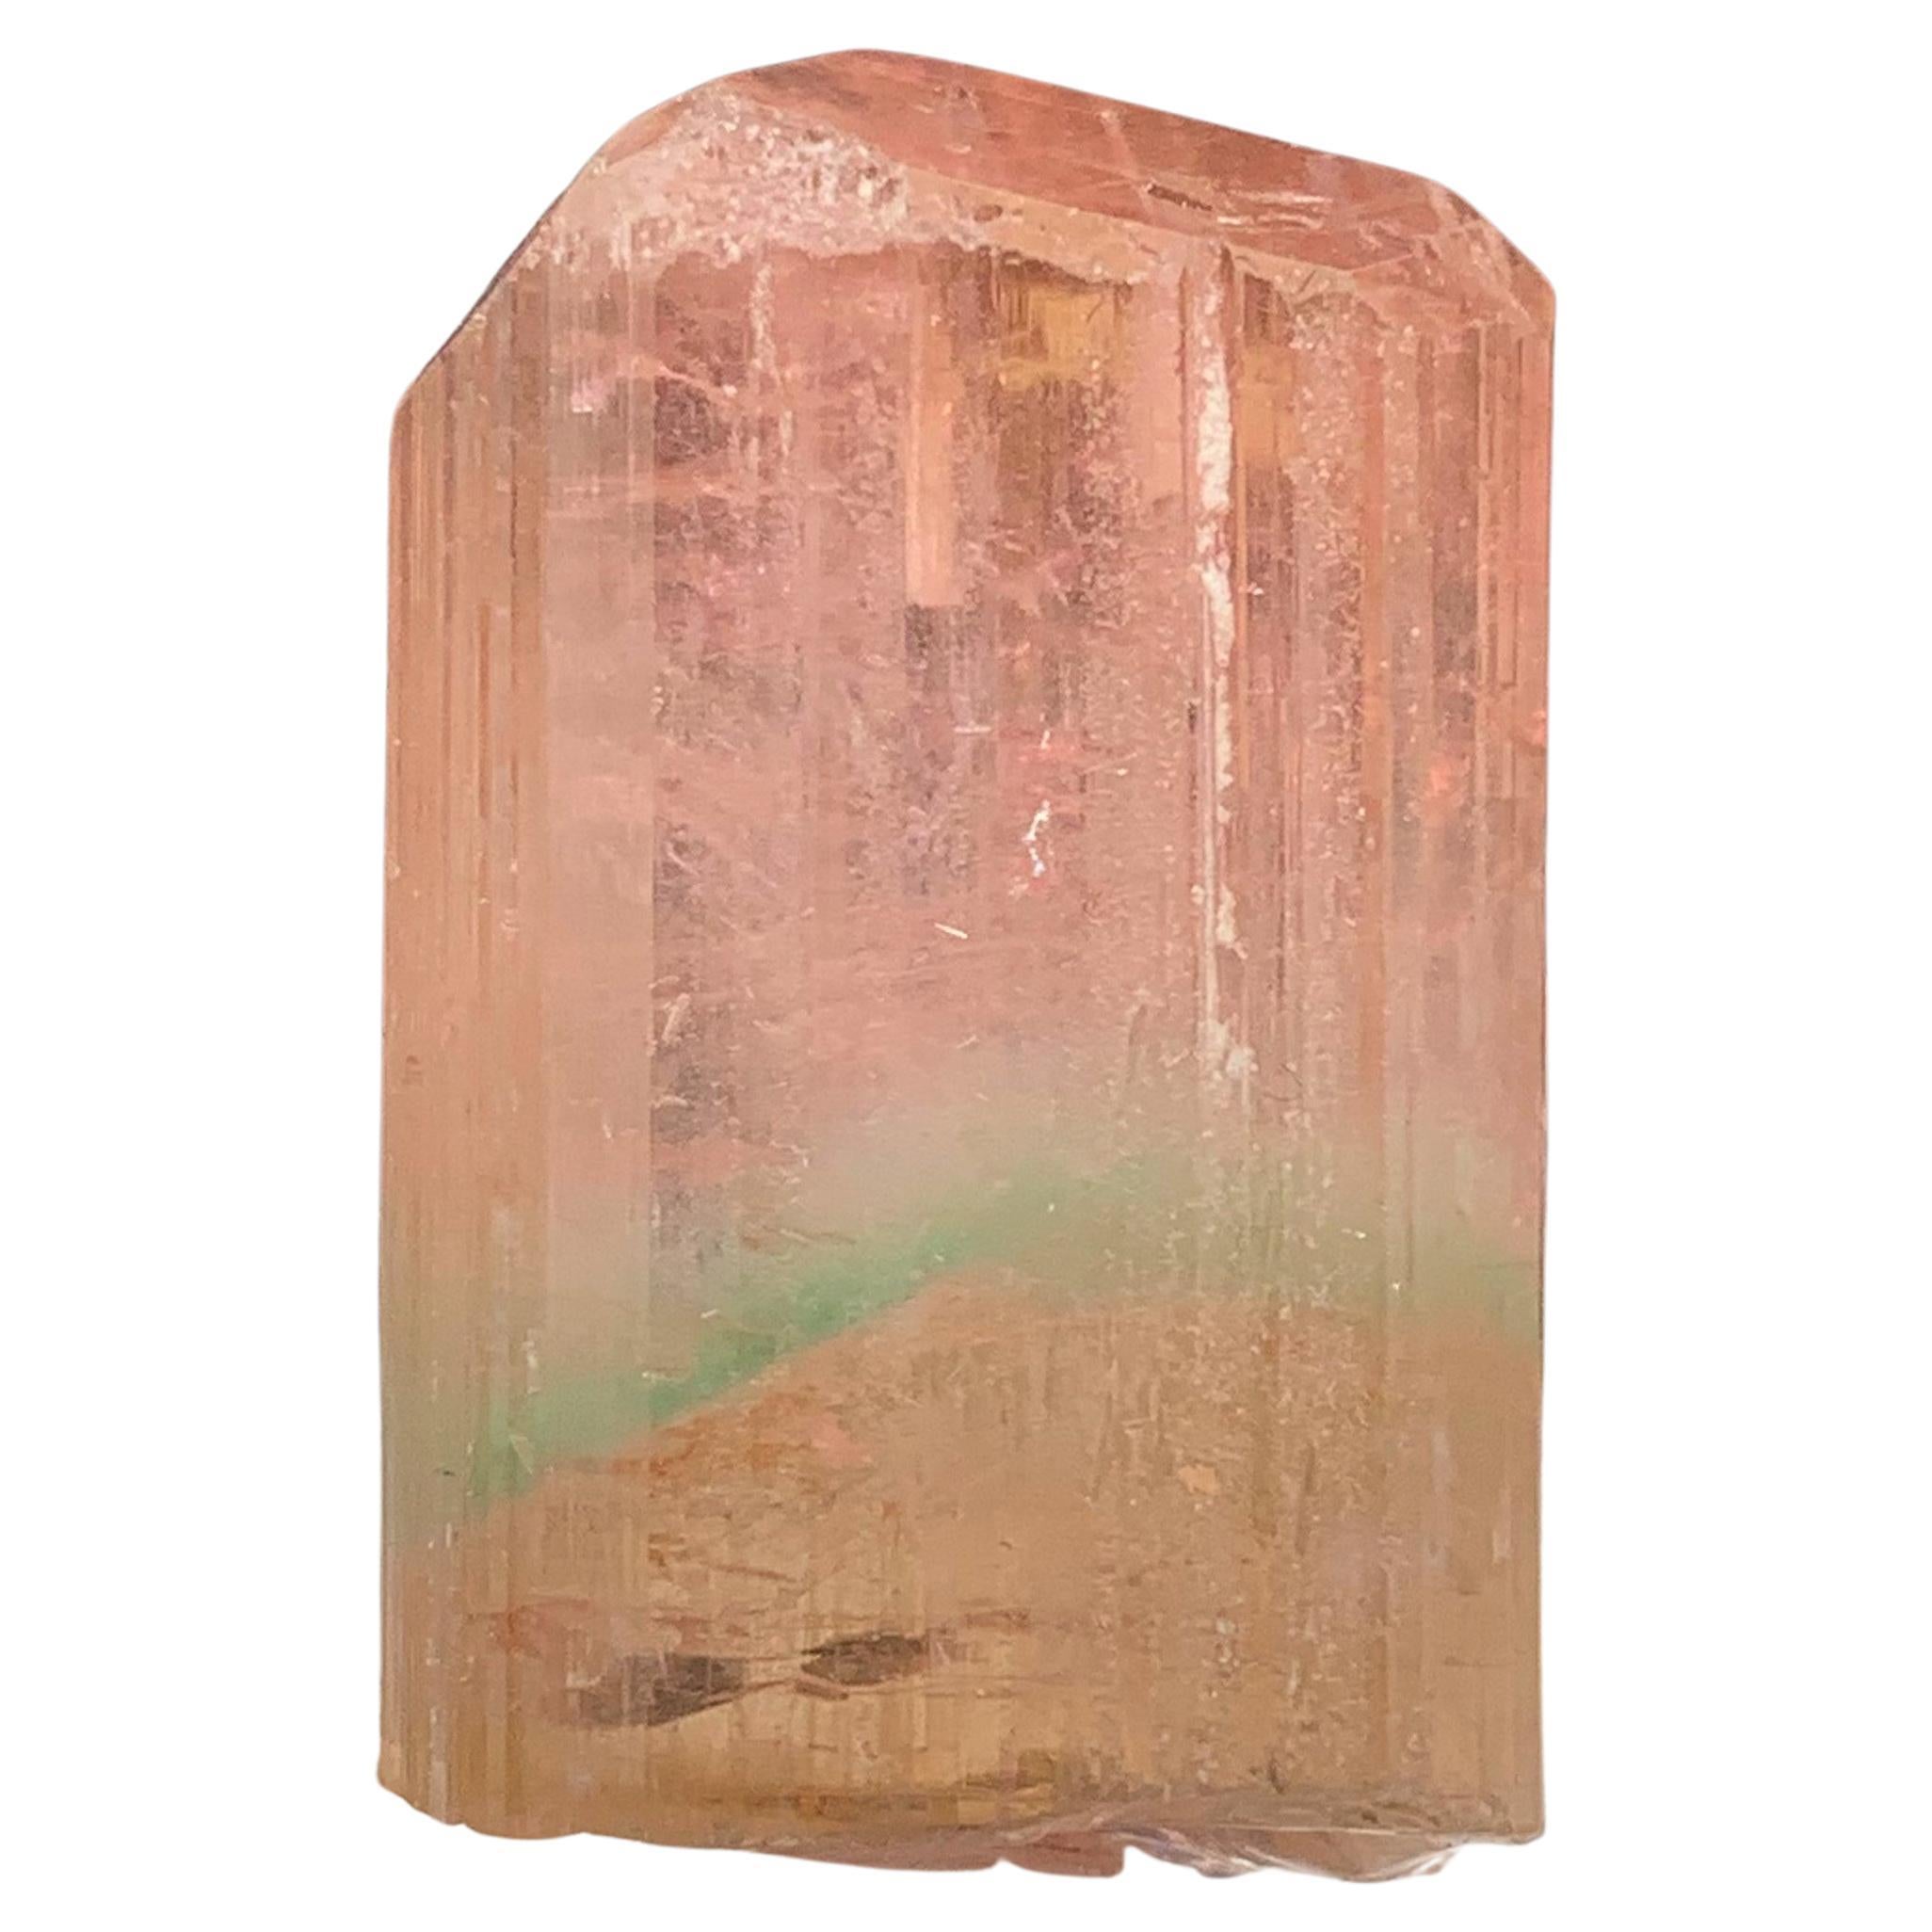 66.10 Carat Attractive Bi Color Tourmaline Crystal from Afghanistan